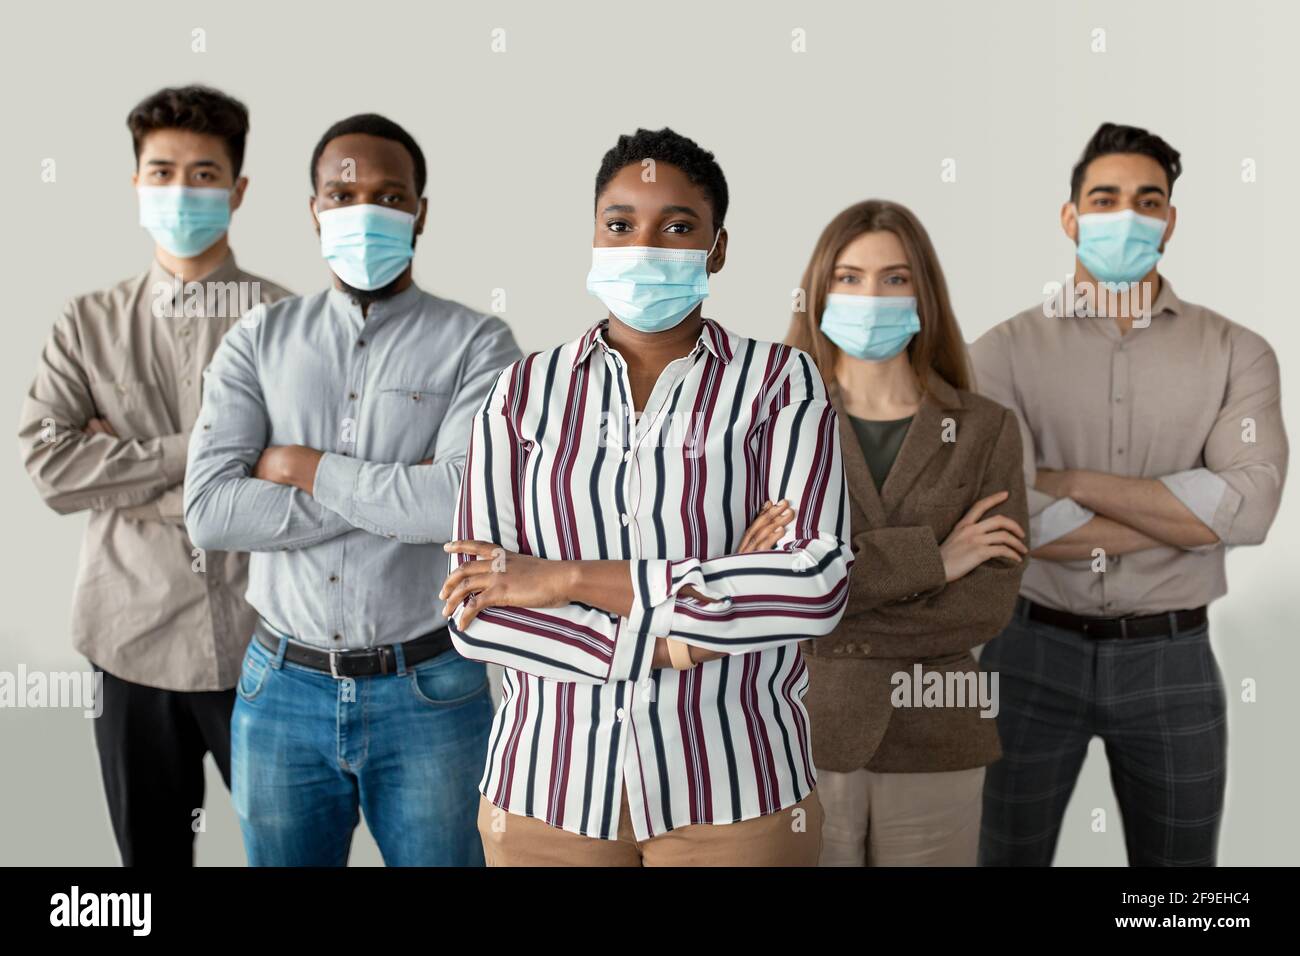 Multicultural businesspeople in masks standing in office with folded arms Stock Photo